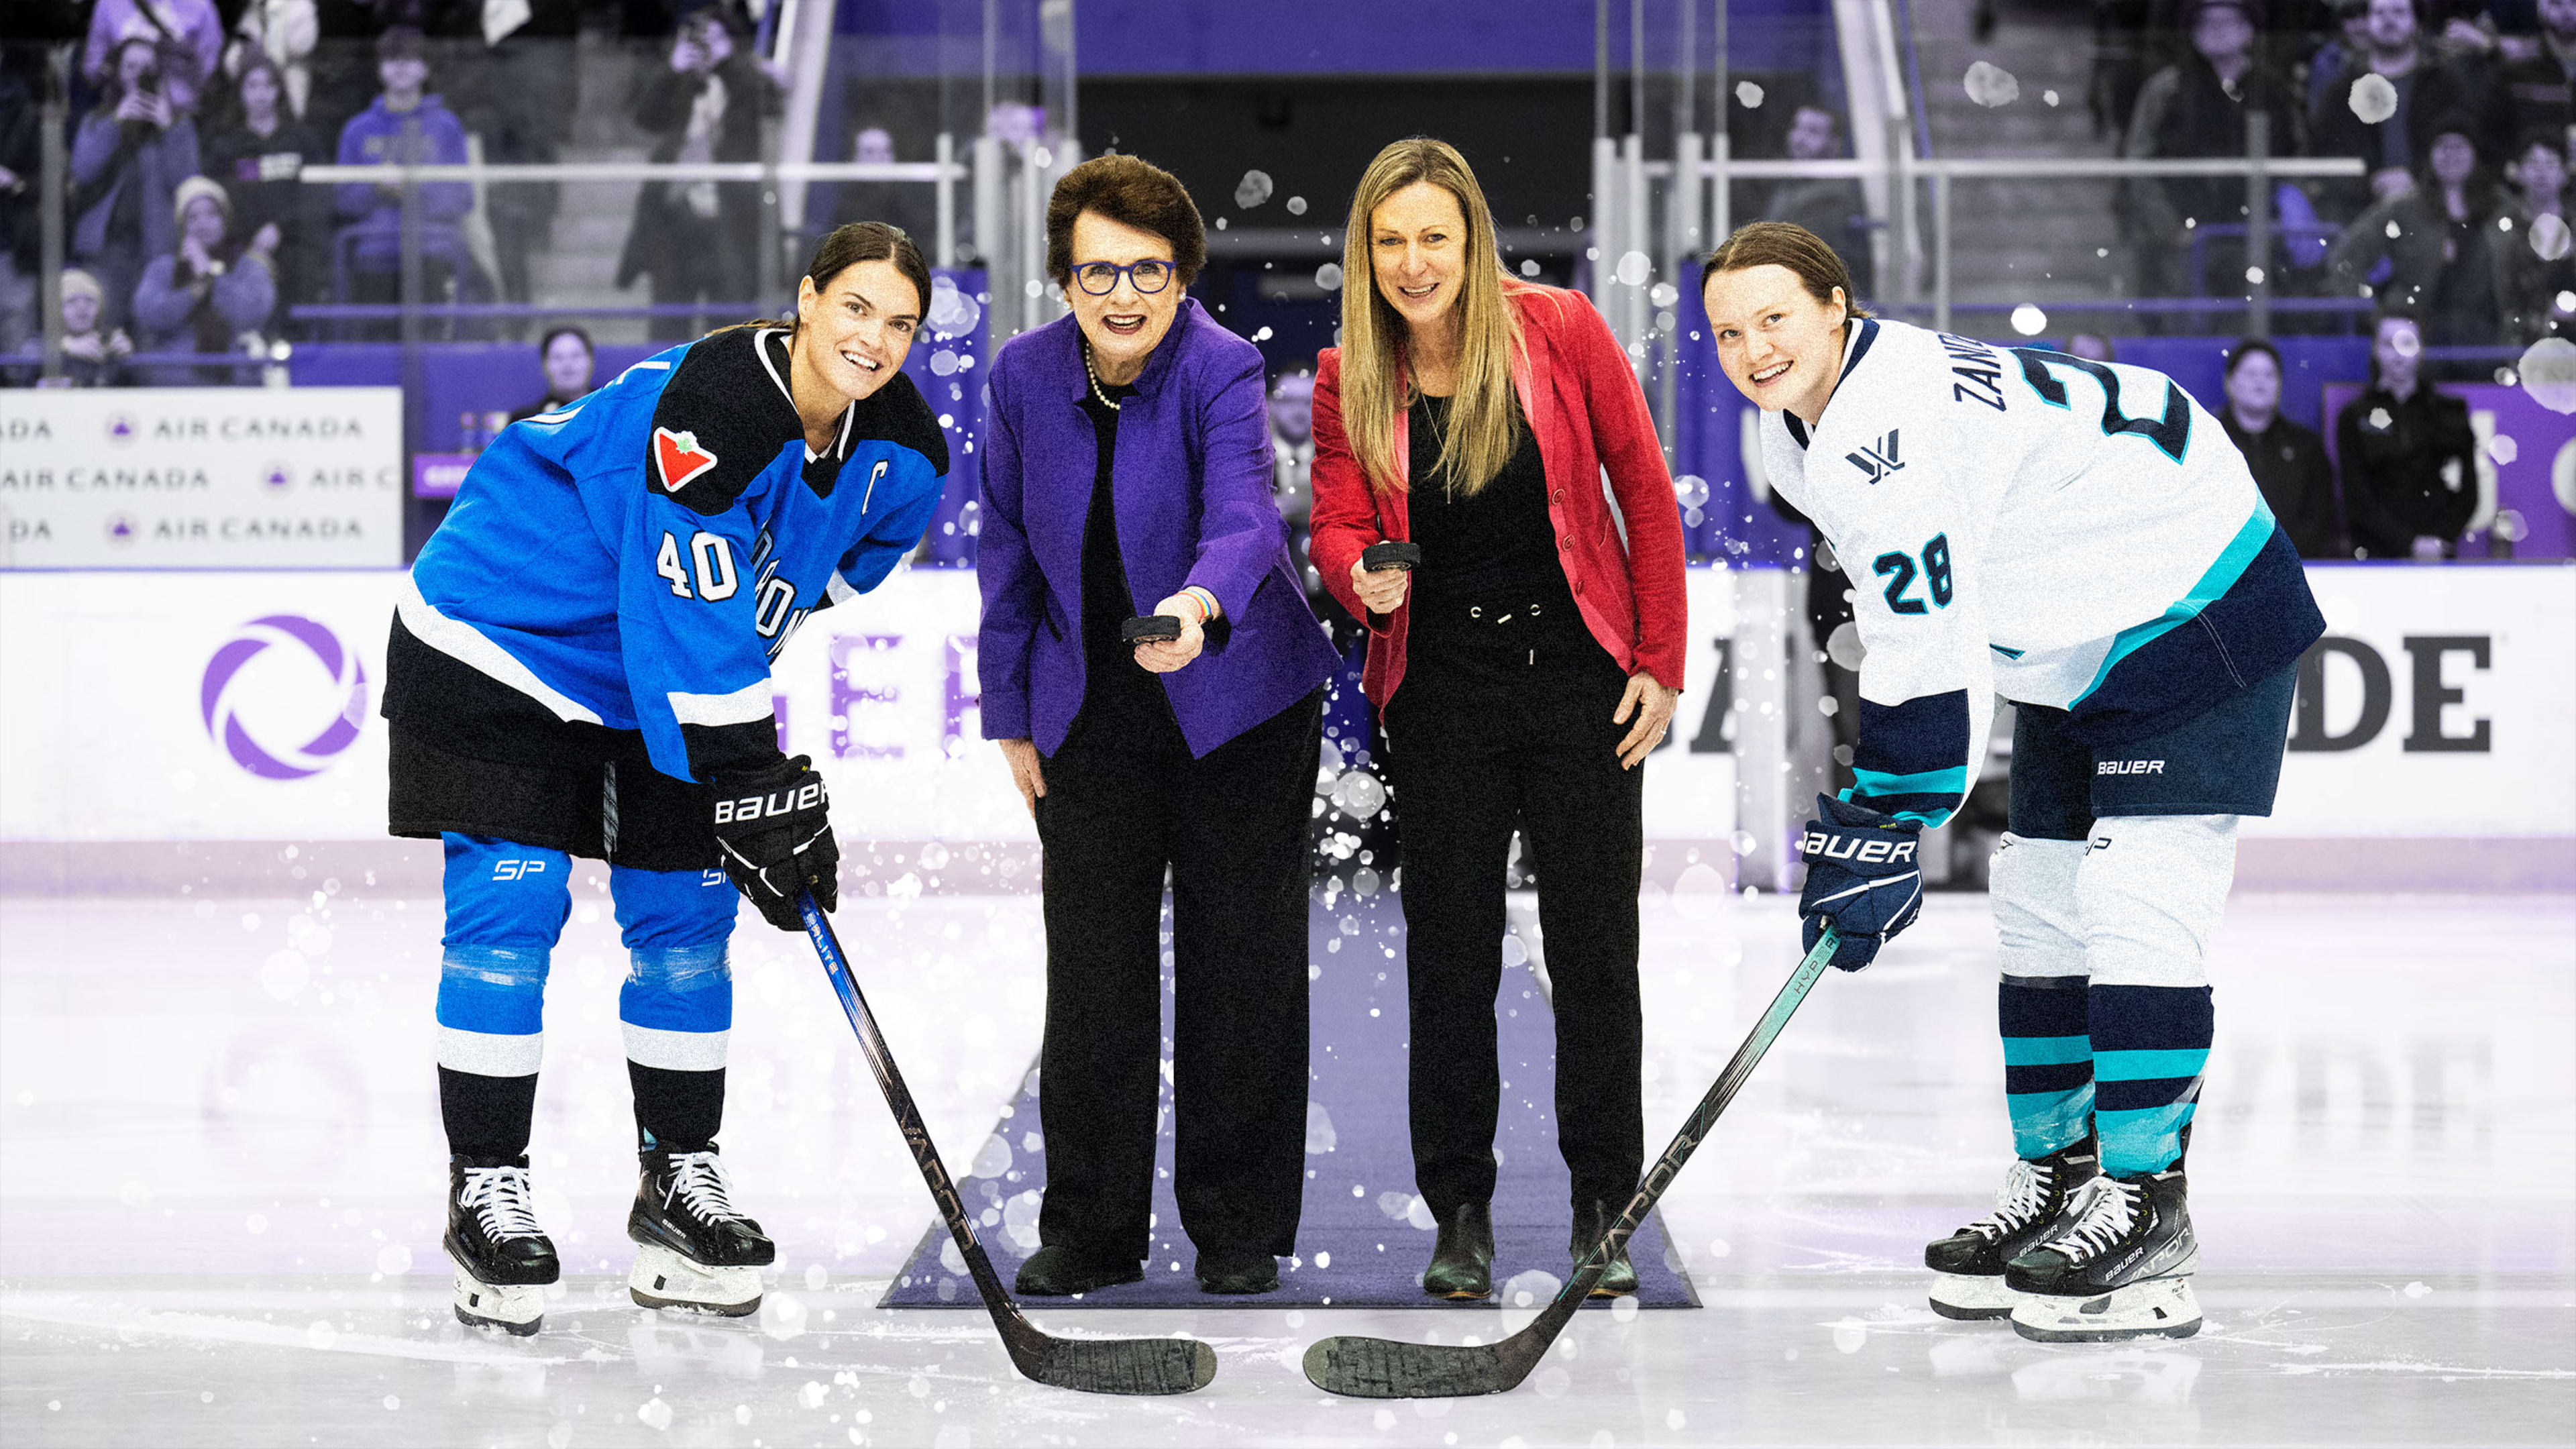 Billie Jean King is pioneering women’s sports again—this time as an investor and adviser